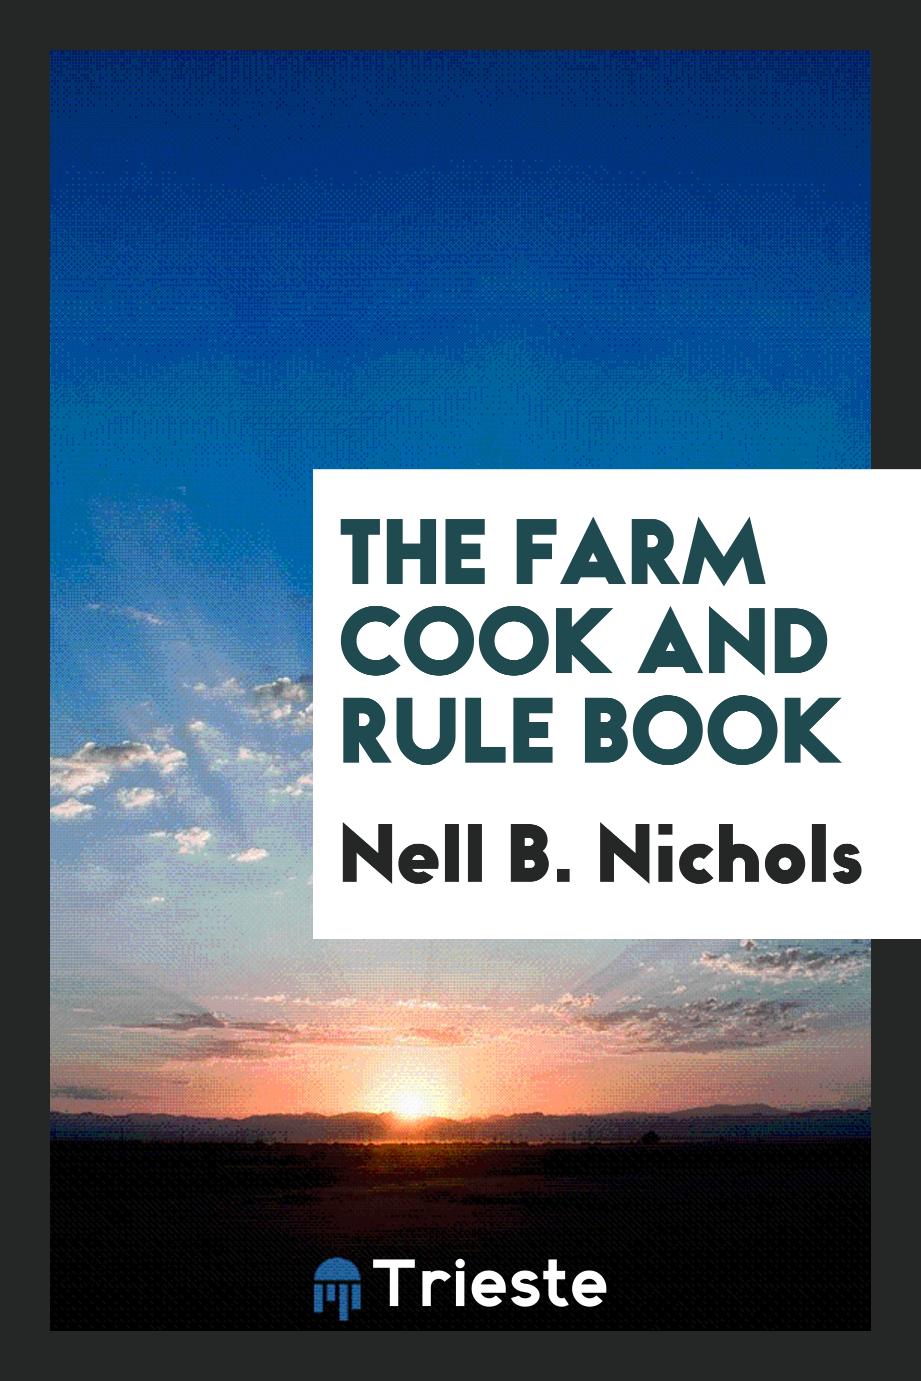 The Farm Cook and Rule Book